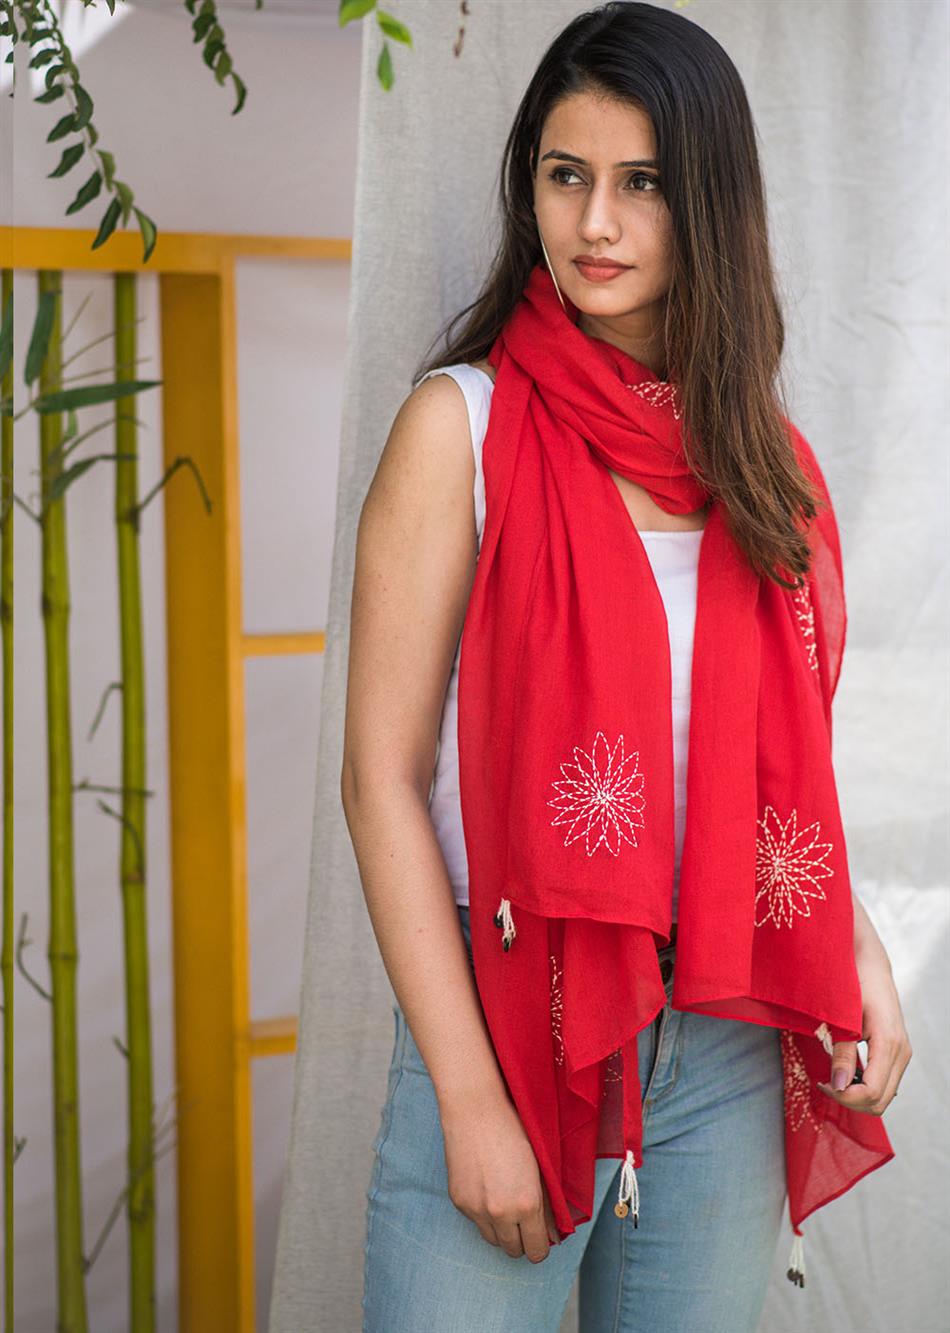 Balletic Mood - Red (Hand Embroidered Scarf) By Jovi Fashion